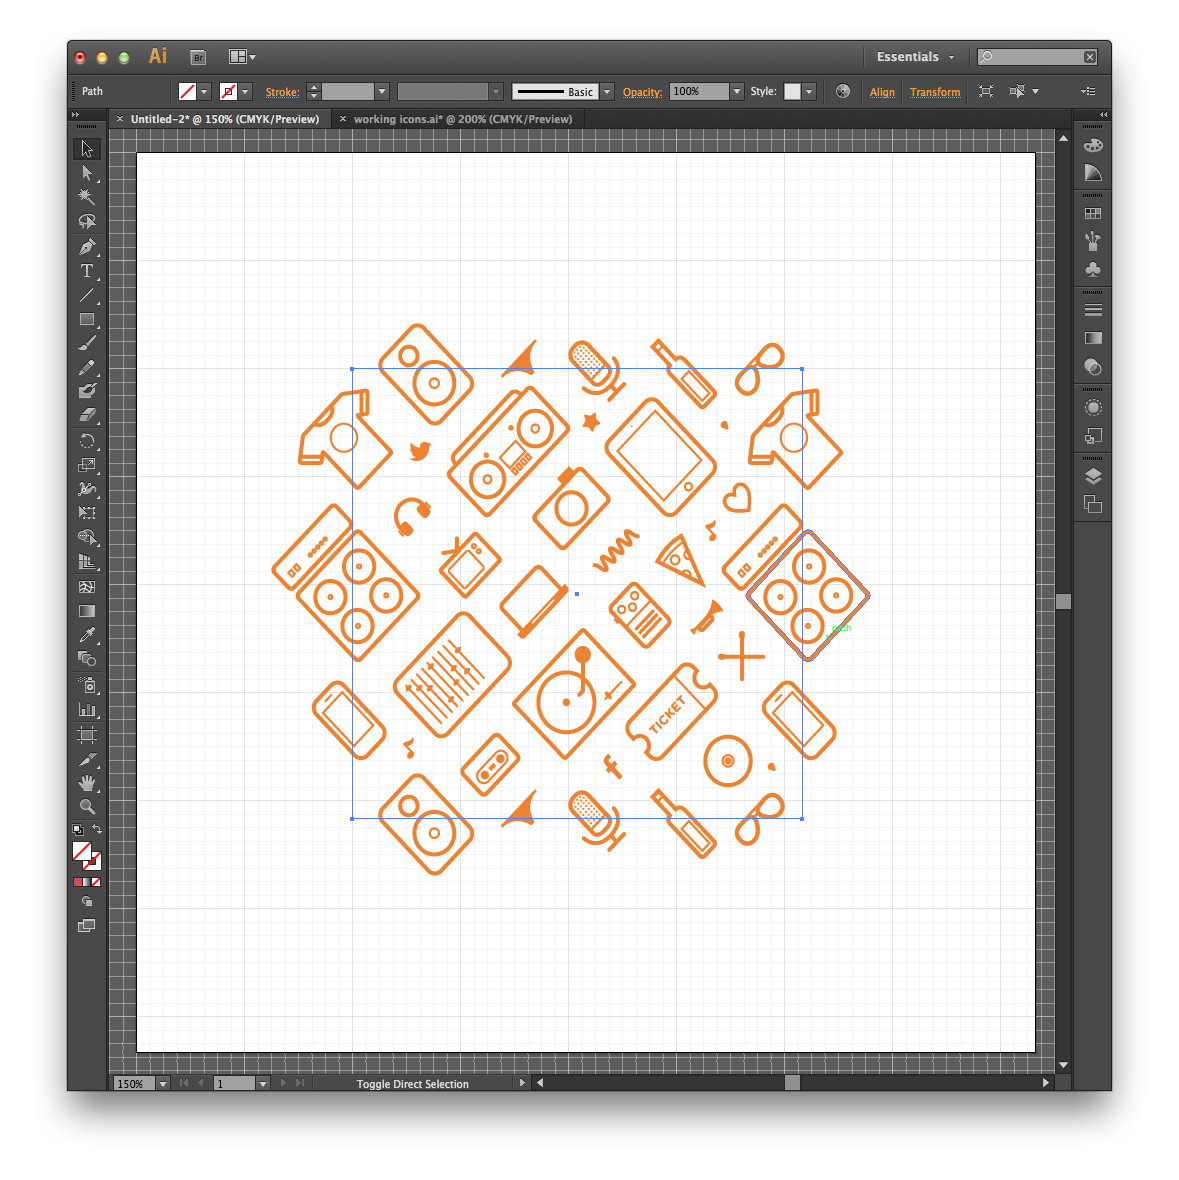 How to Make a Repeating Pattern with Icons in Illustrator - TheNounProject